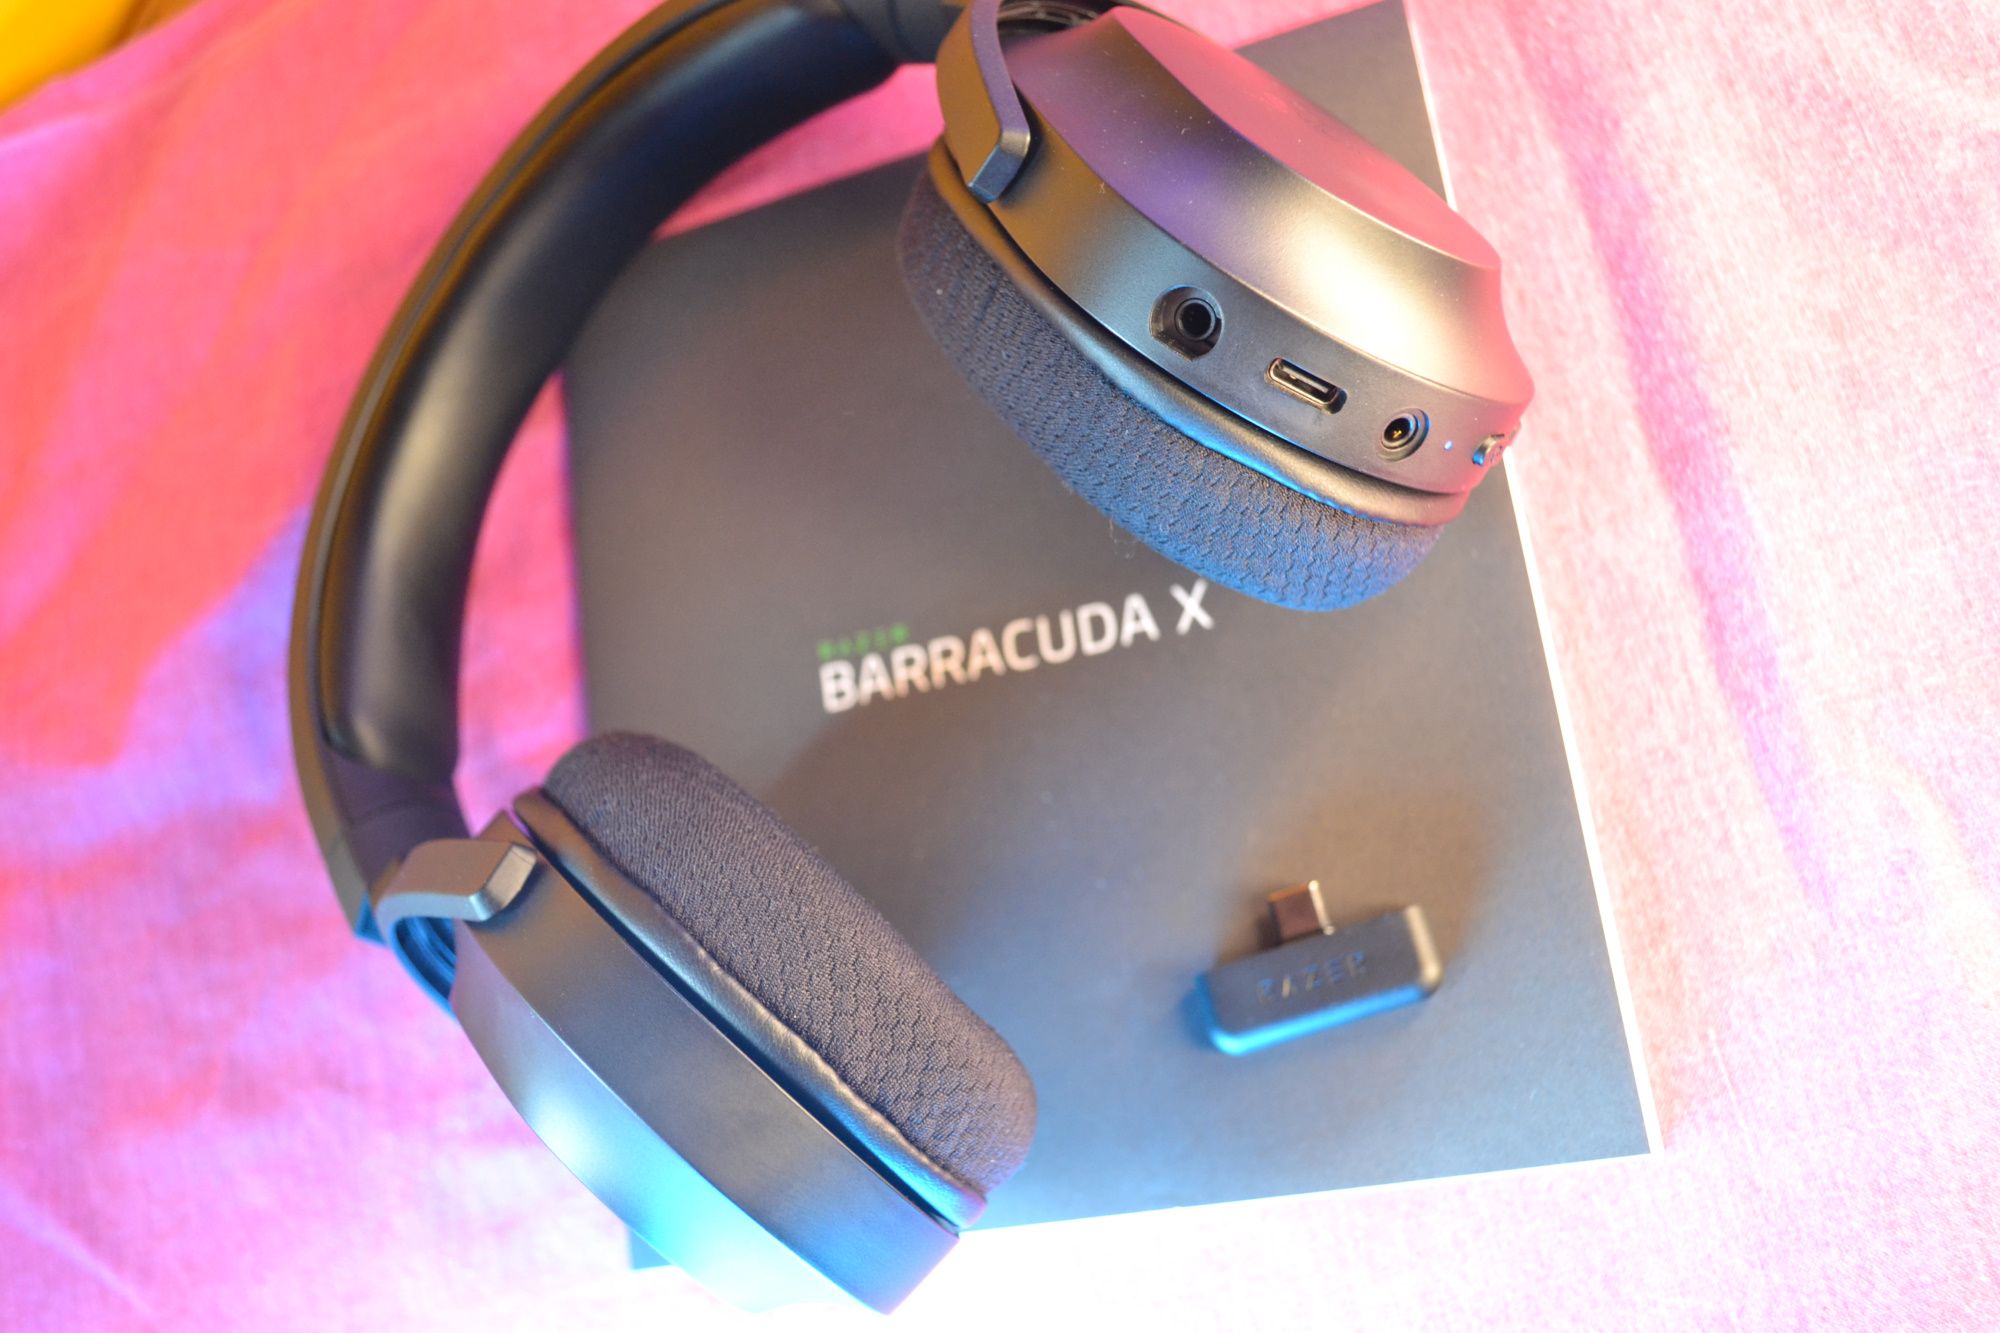 Razer Barracuda X gaming headset review - Gaming - Technology